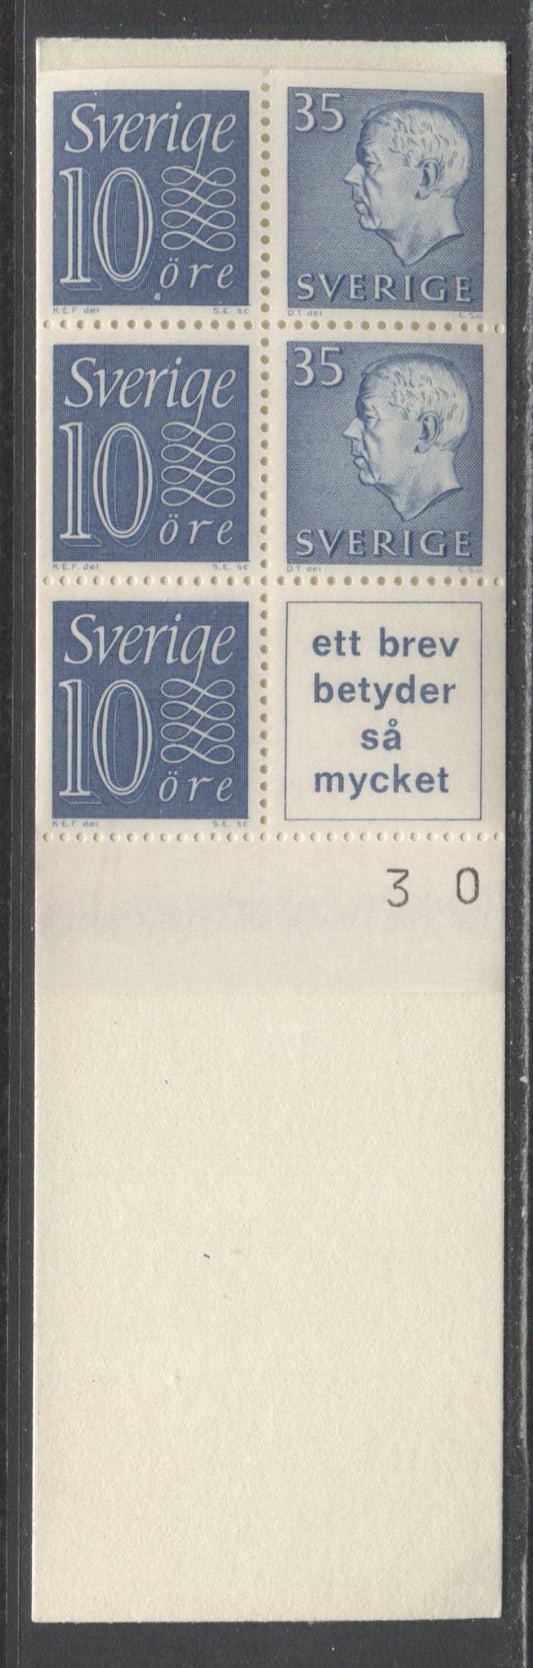 Lot 174 Sweden SC#586c (Facit #HA11BOV) 1963 Re-Engraved King Gustav VI Adolf Definitive Issue, With Inscribed Label, Inverted Pane, 10 Ore Stamps At Left, 2 Digits of Control Number on Tab, A VFNH Booklet of 6 (2 +3 + Label), Estimated Value $15